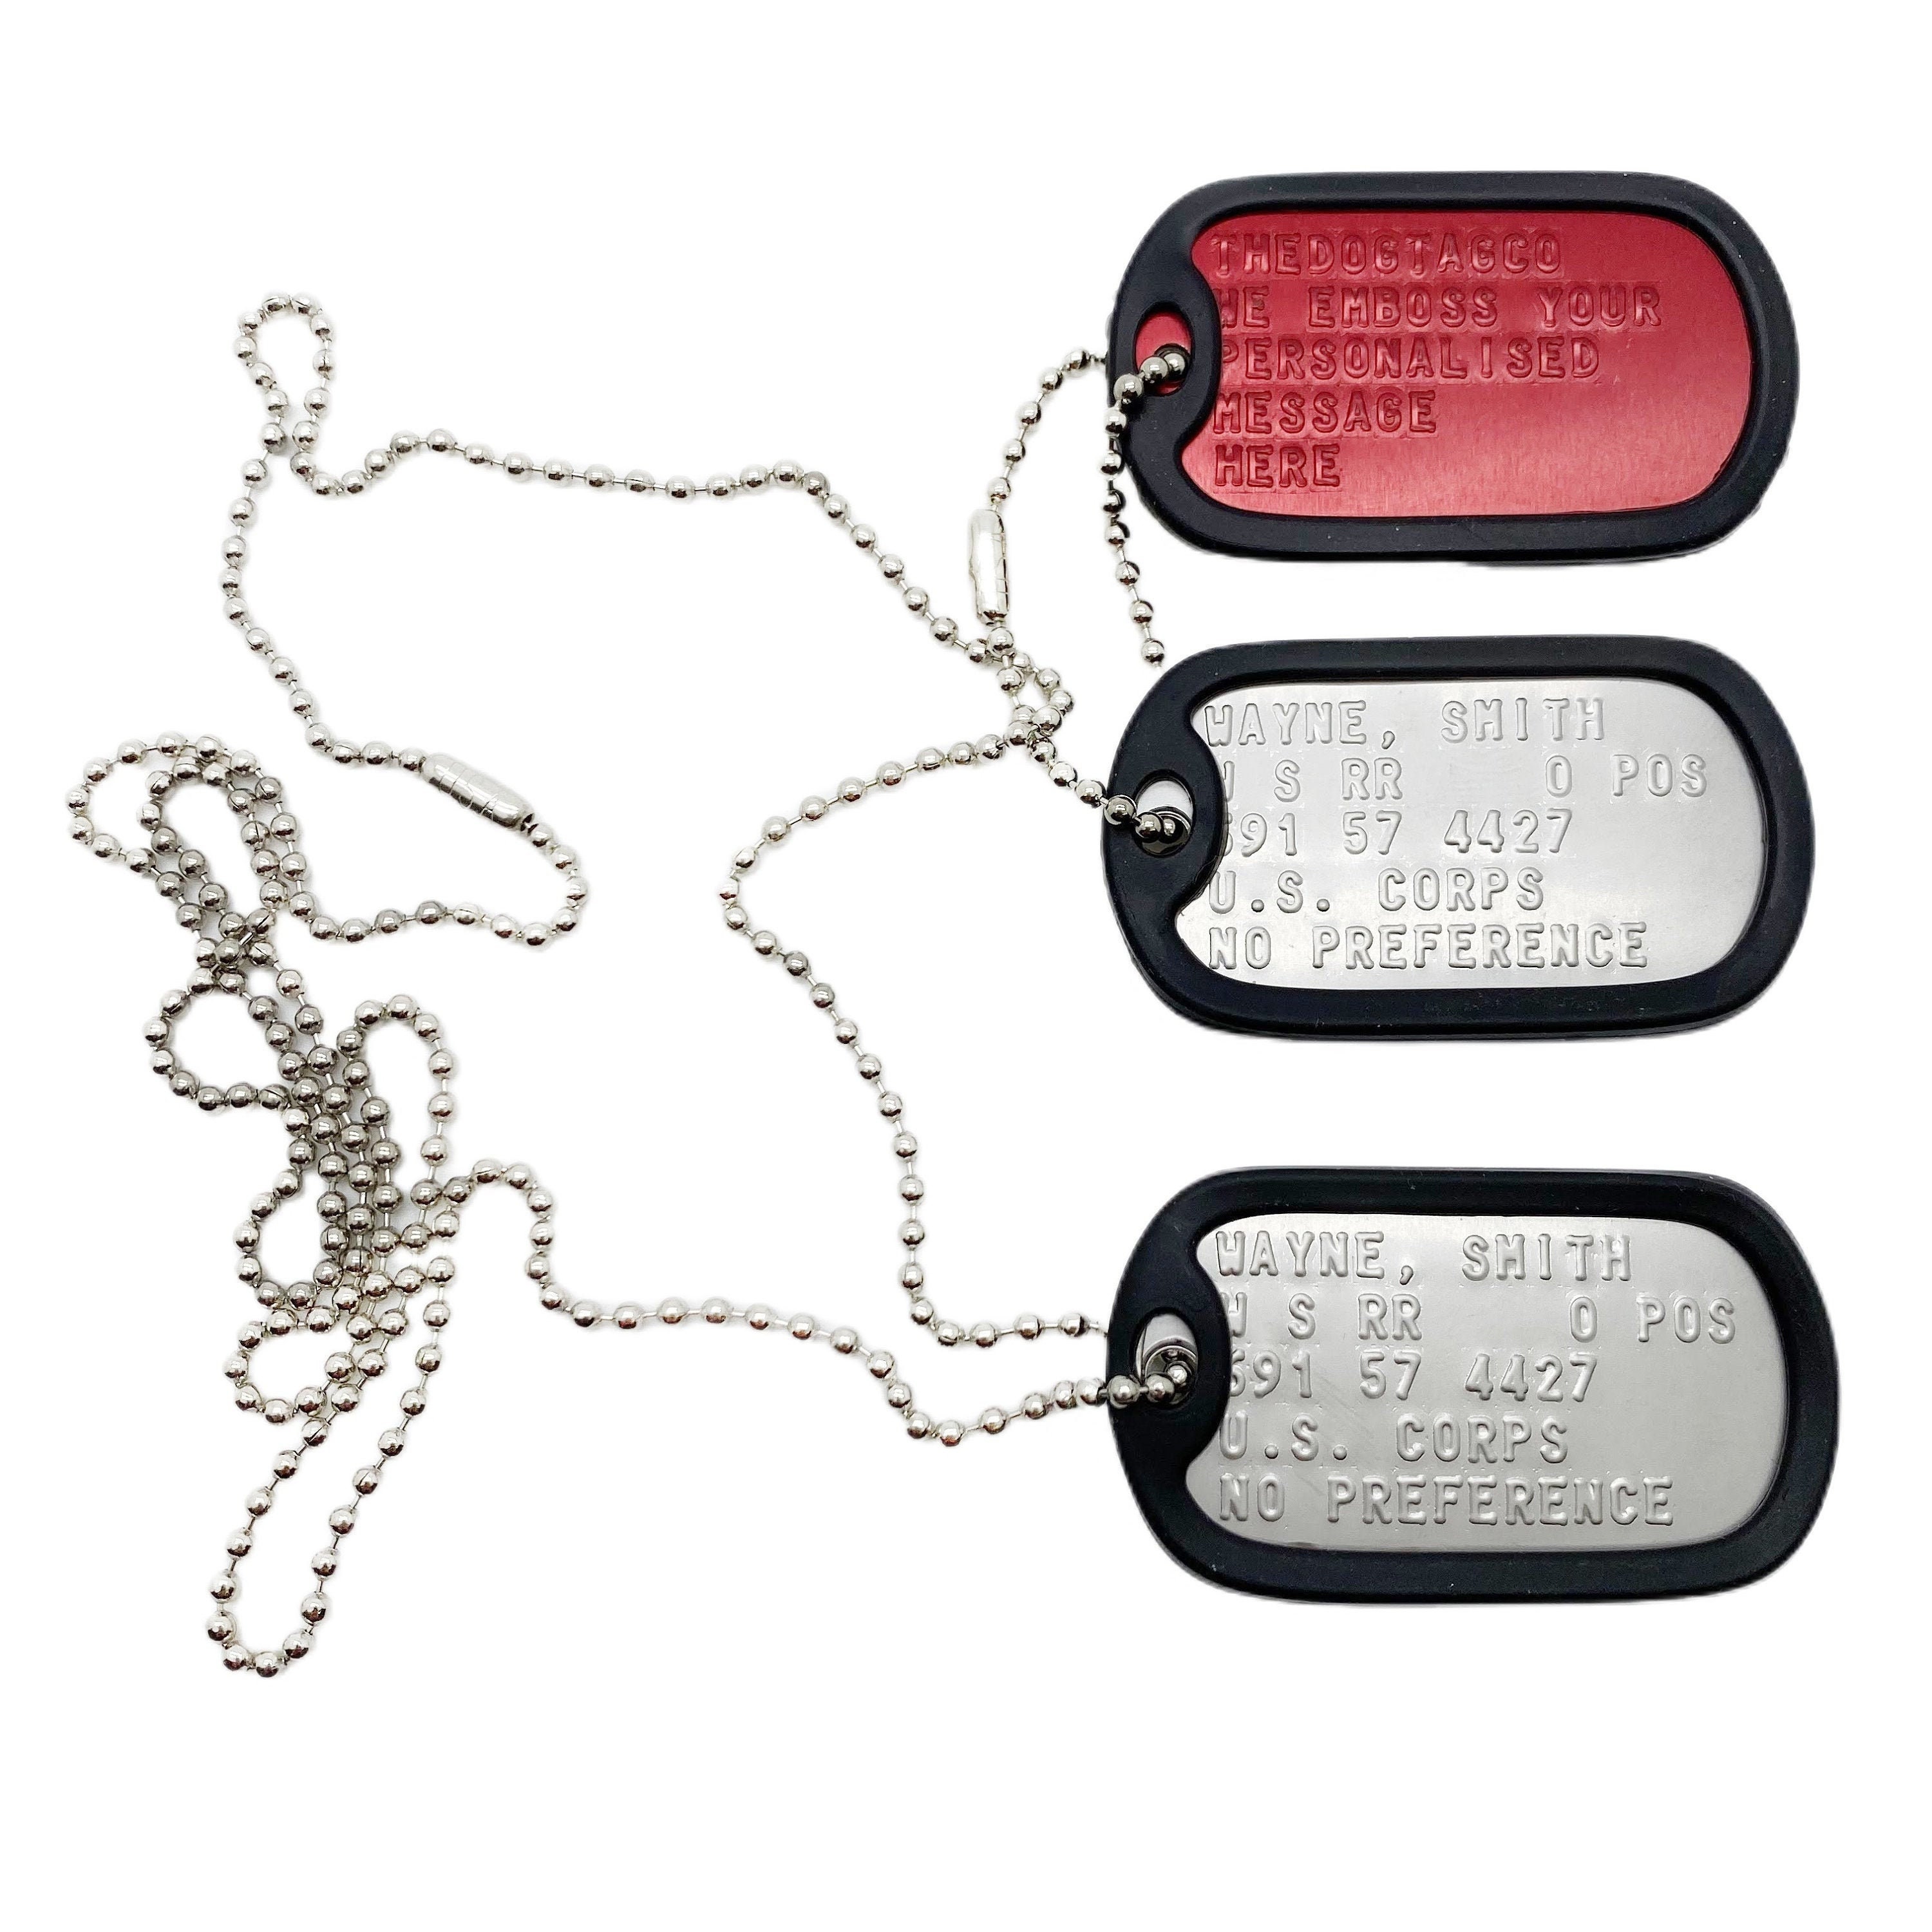 30 Pieces Military Dog Tags Set Including 10 Stainless Steel Blank Dog Tag 10 Steel Ball Chain and 10 Military Silicone Dog Tag Silencer